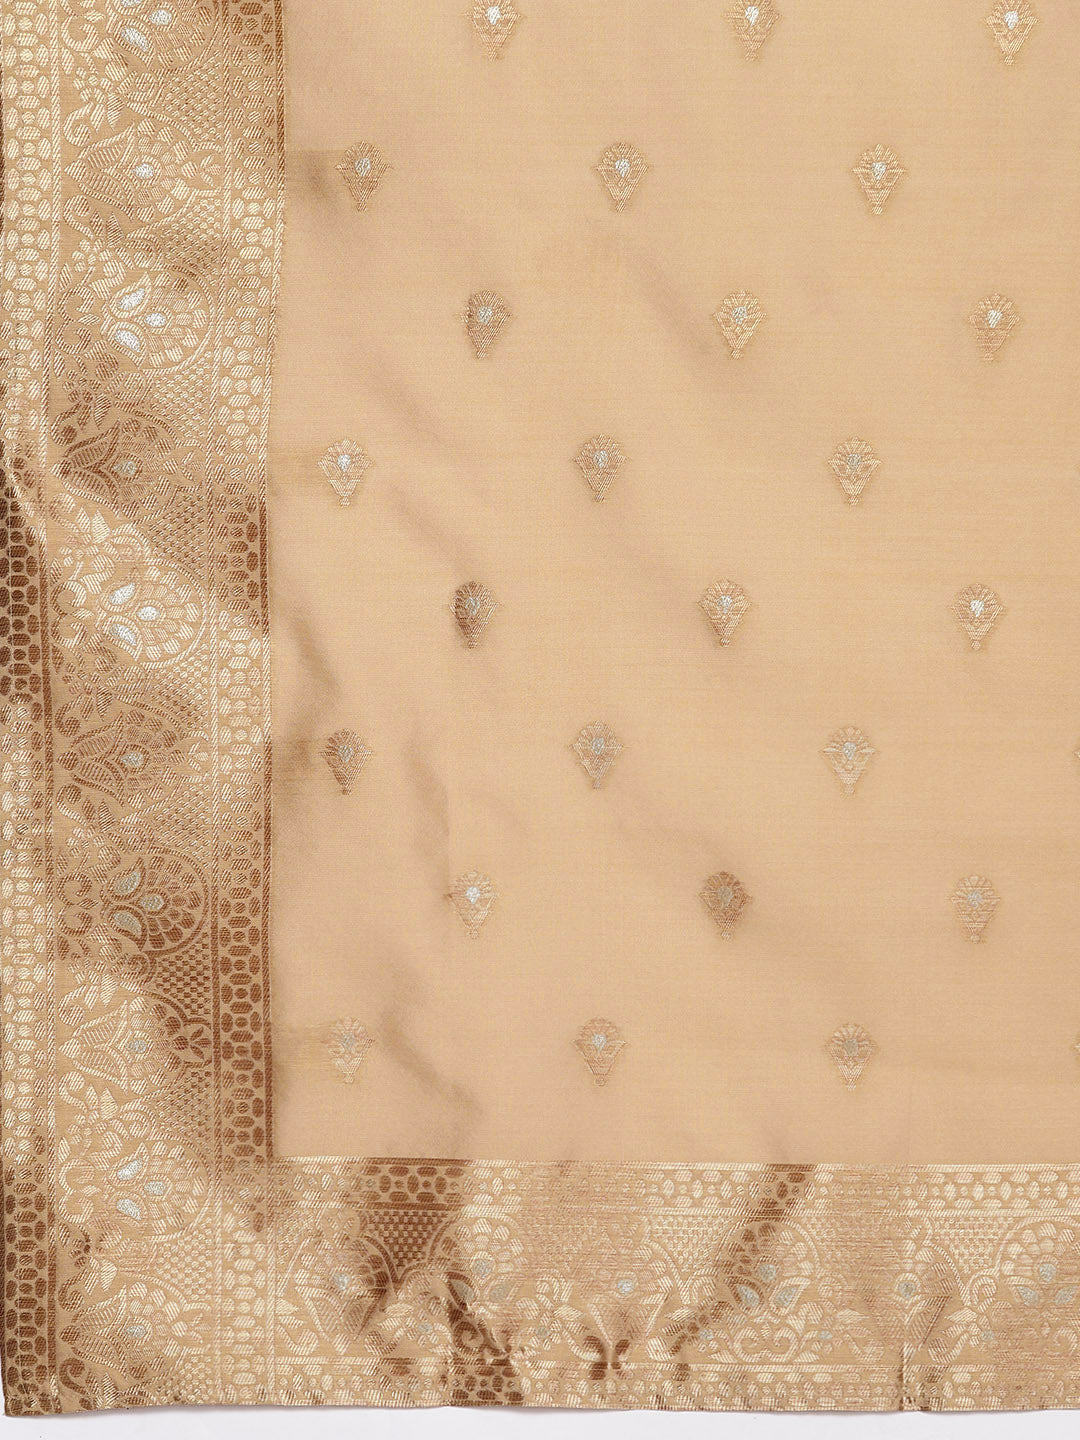 Tan & Gold Woven Design Ethnic Motifs Unstitched Dress Material